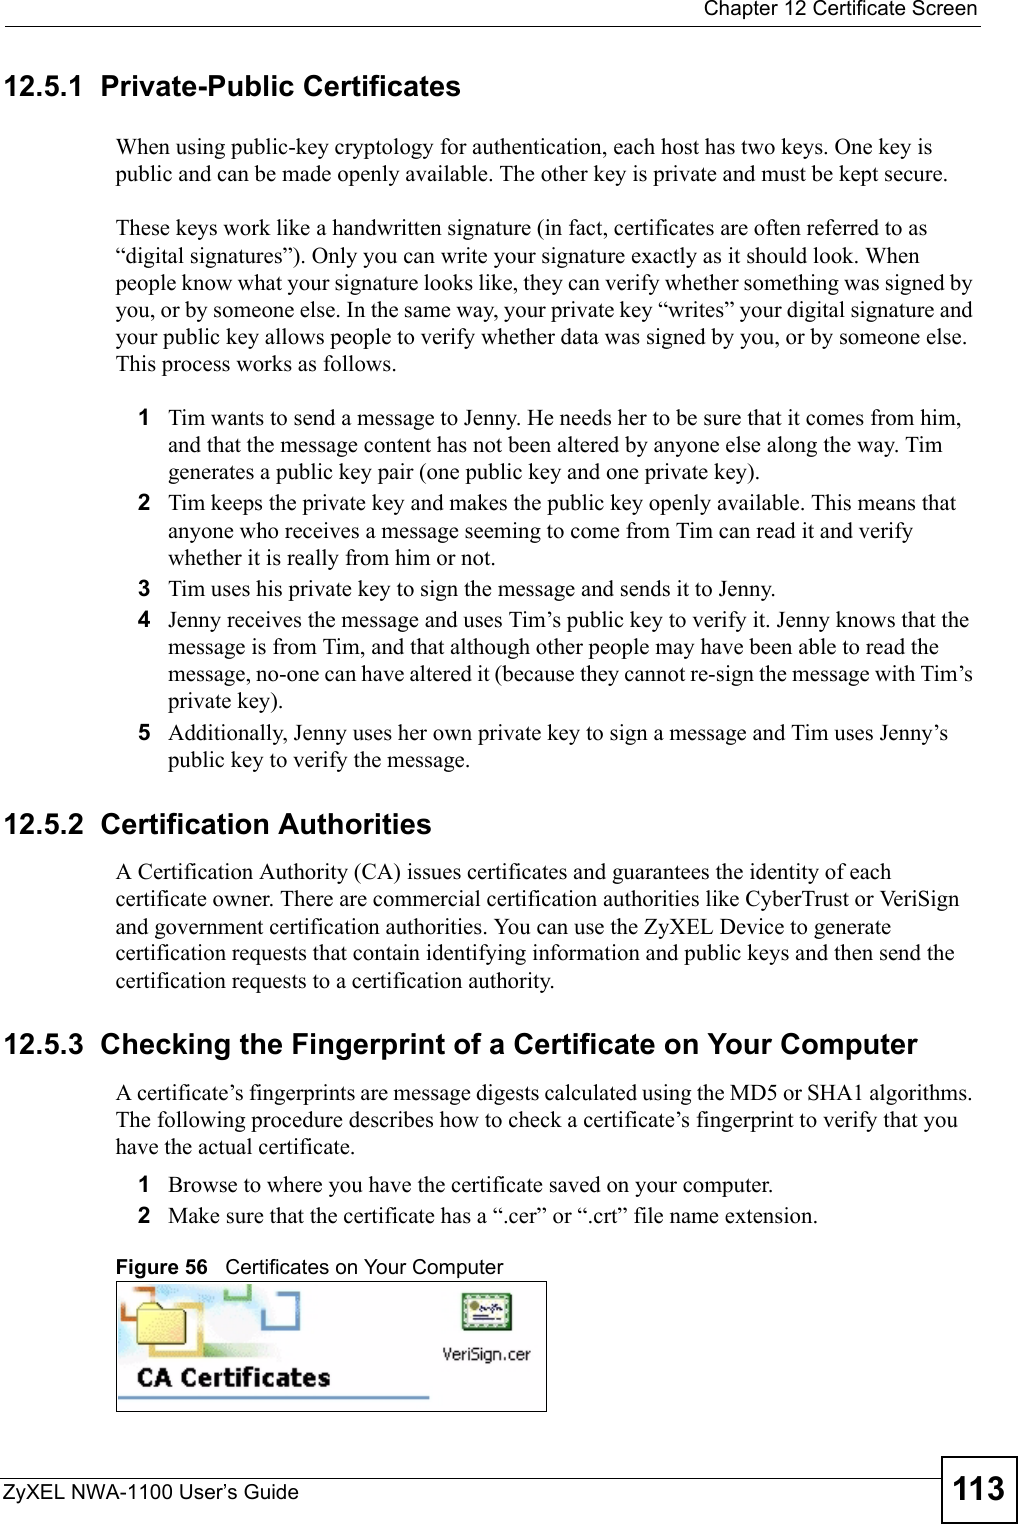  Chapter 12 Certificate ScreenZyXEL NWA-1100 User’s Guide 11312.5.1  Private-Public CertificatesWhen using public-key cryptology for authentication, each host has two keys. One key is public and can be made openly available. The other key is private and must be kept secure. These keys work like a handwritten signature (in fact, certificates are often referred to as “digital signatures”). Only you can write your signature exactly as it should look. When people know what your signature looks like, they can verify whether something was signed by you, or by someone else. In the same way, your private key “writes” your digital signature and your public key allows people to verify whether data was signed by you, or by someone else. This process works as follows.1Tim wants to send a message to Jenny. He needs her to be sure that it comes from him, and that the message content has not been altered by anyone else along the way. Tim generates a public key pair (one public key and one private key). 2Tim keeps the private key and makes the public key openly available. This means that anyone who receives a message seeming to come from Tim can read it and verify whether it is really from him or not. 3Tim uses his private key to sign the message and sends it to Jenny.4Jenny receives the message and uses Tim’s public key to verify it. Jenny knows that the message is from Tim, and that although other people may have been able to read the message, no-one can have altered it (because they cannot re-sign the message with Tim’s private key).5Additionally, Jenny uses her own private key to sign a message and Tim uses Jenny’s public key to verify the message.12.5.2  Certification AuthoritiesA Certification Authority (CA) issues certificates and guarantees the identity of each certificate owner. There are commercial certification authorities like CyberTrust or VeriSign and government certification authorities. You can use the ZyXEL Device to generate certification requests that contain identifying information and public keys and then send the certification requests to a certification authority.12.5.3  Checking the Fingerprint of a Certificate on Your ComputerA certificate’s fingerprints are message digests calculated using the MD5 or SHA1 algorithms. The following procedure describes how to check a certificate’s fingerprint to verify that you have the actual certificate. 1Browse to where you have the certificate saved on your computer. 2Make sure that the certificate has a “.cer” or “.crt” file name extension.Figure 56   Certificates on Your Computer